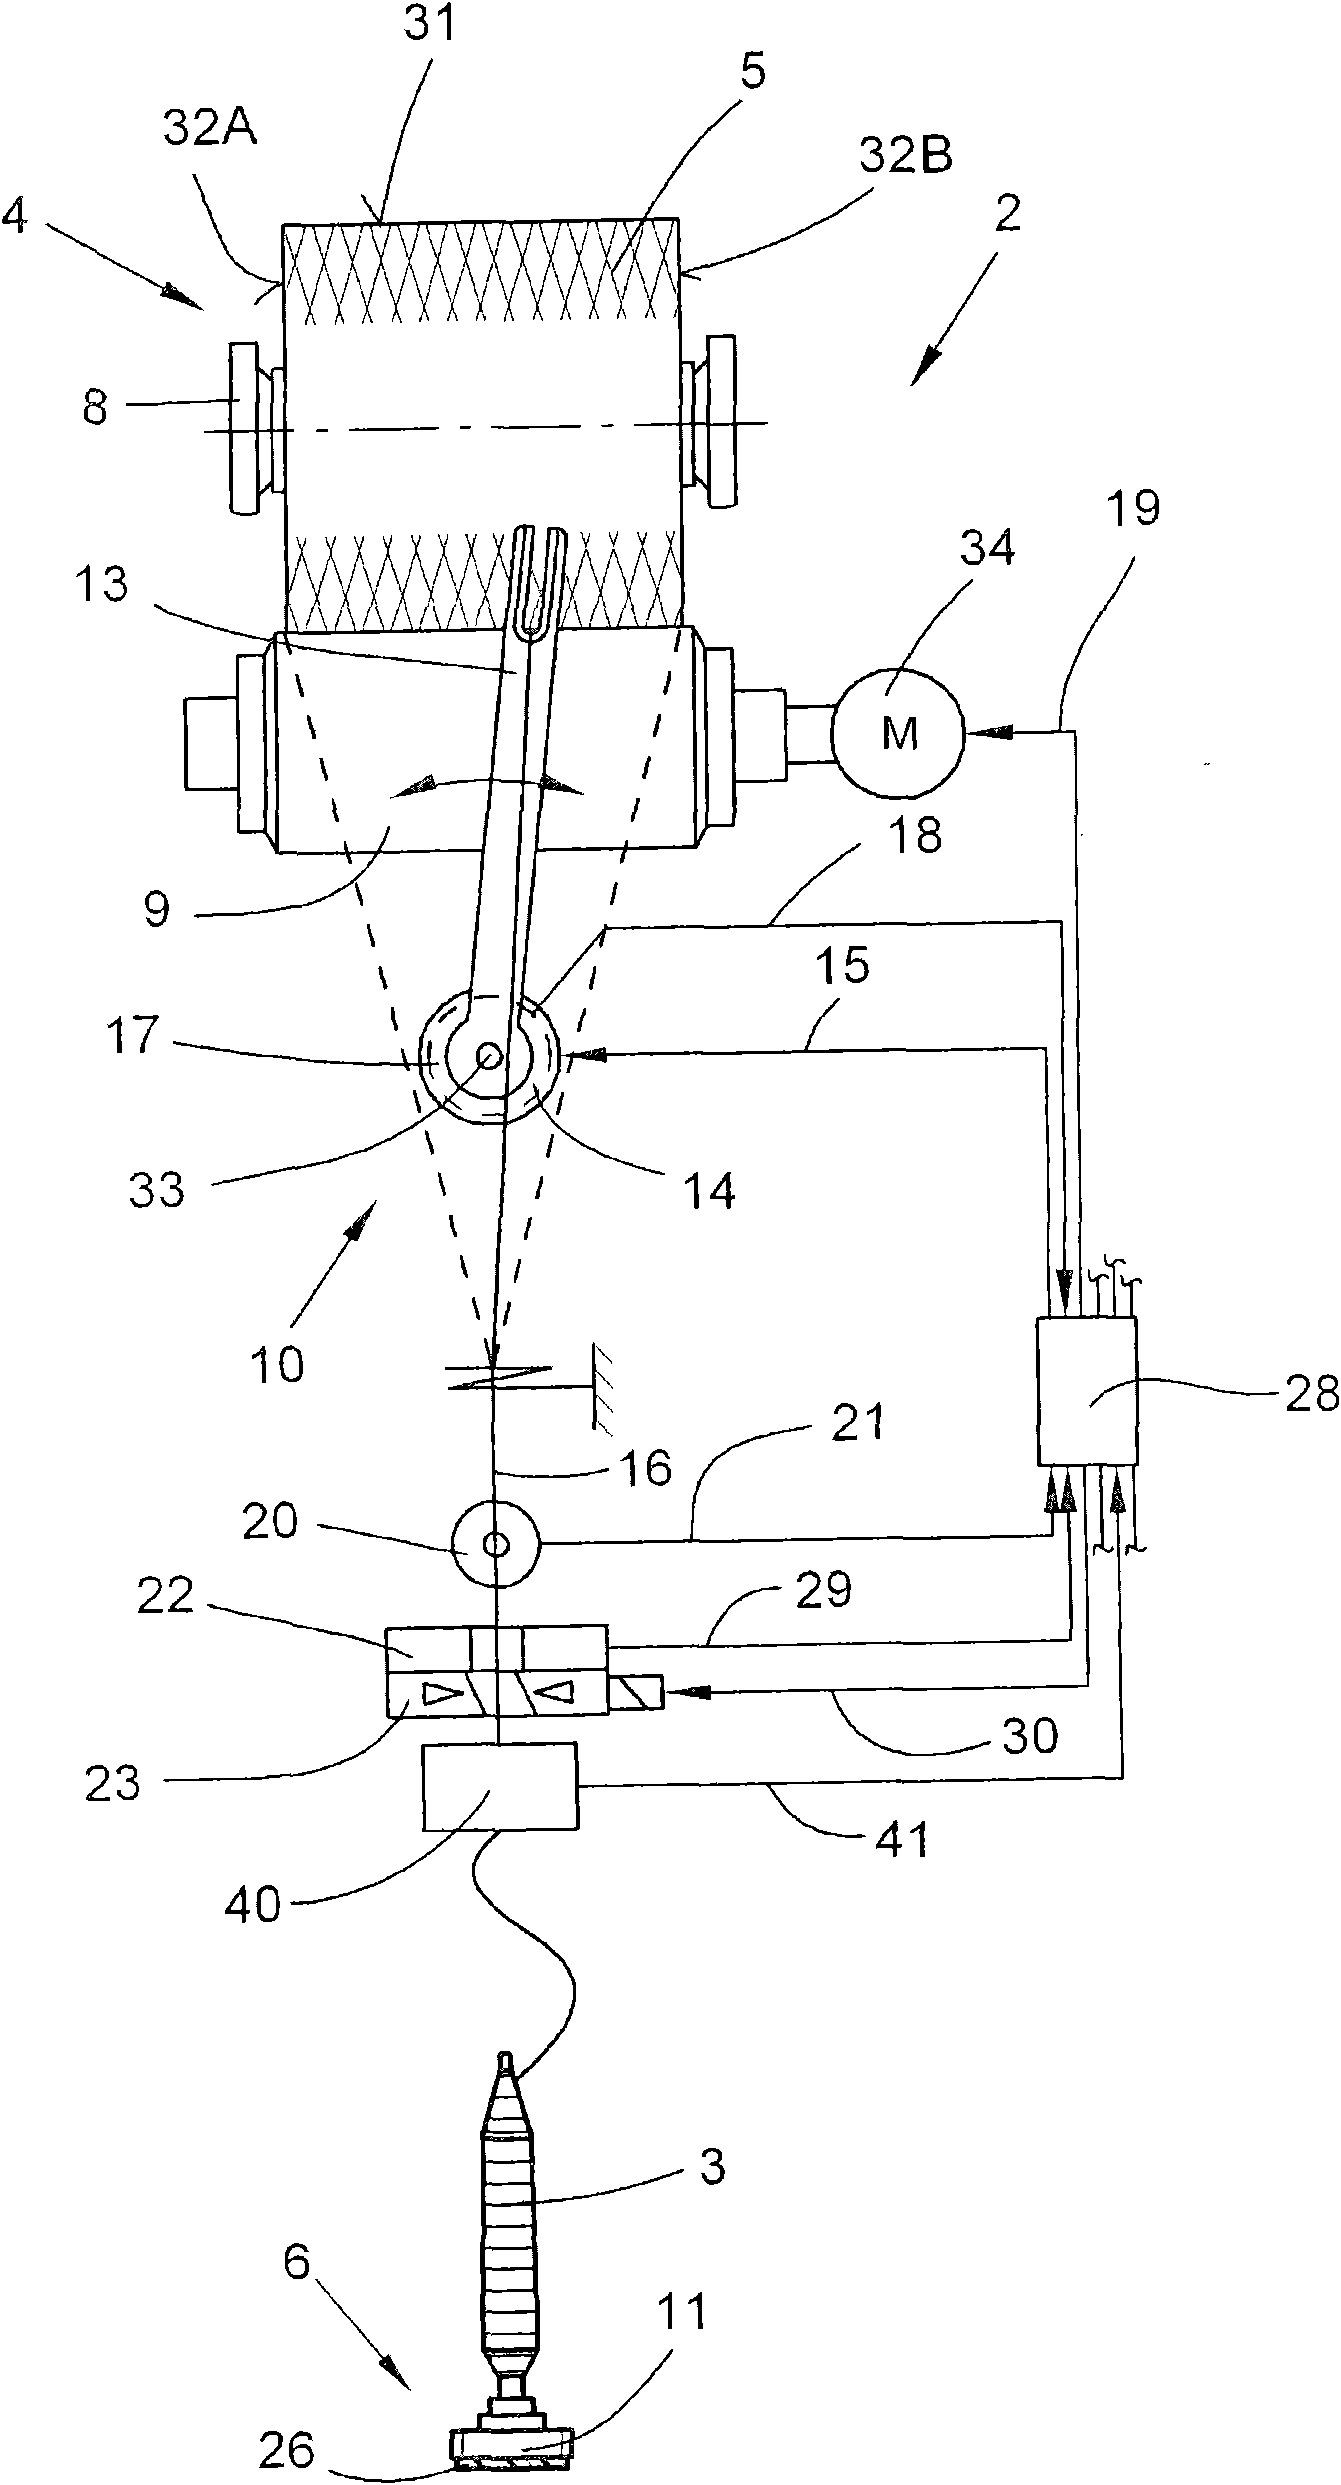 Method for operating workplaces on a textile machine for creating cross-wound spools